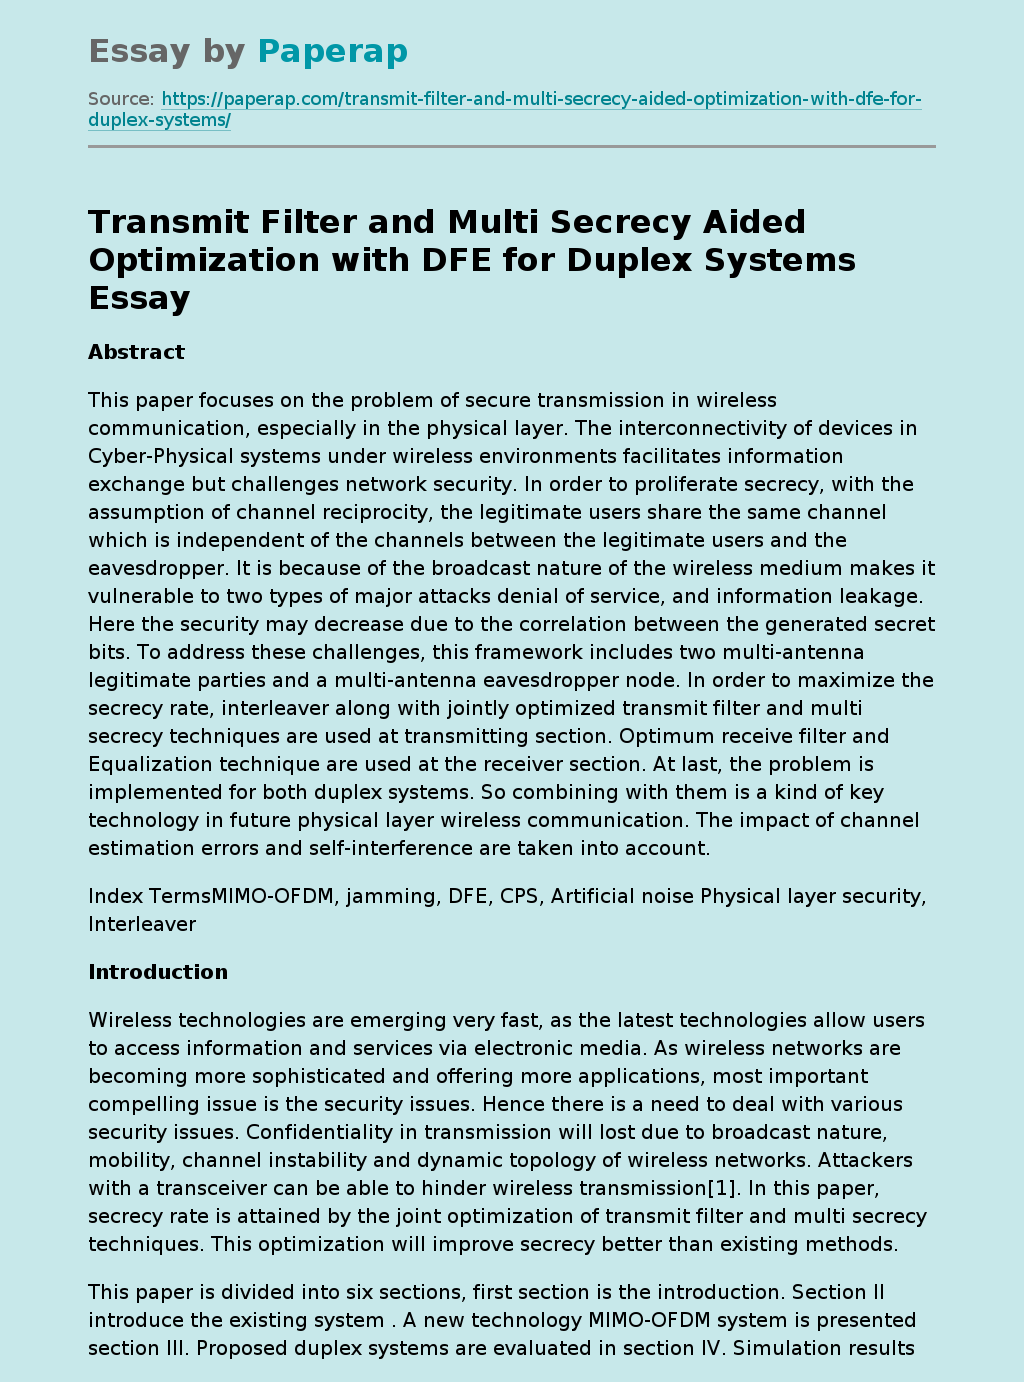 Transmit Filter and Multi Secrecy Aided Optimization with DFE for Duplex Systems